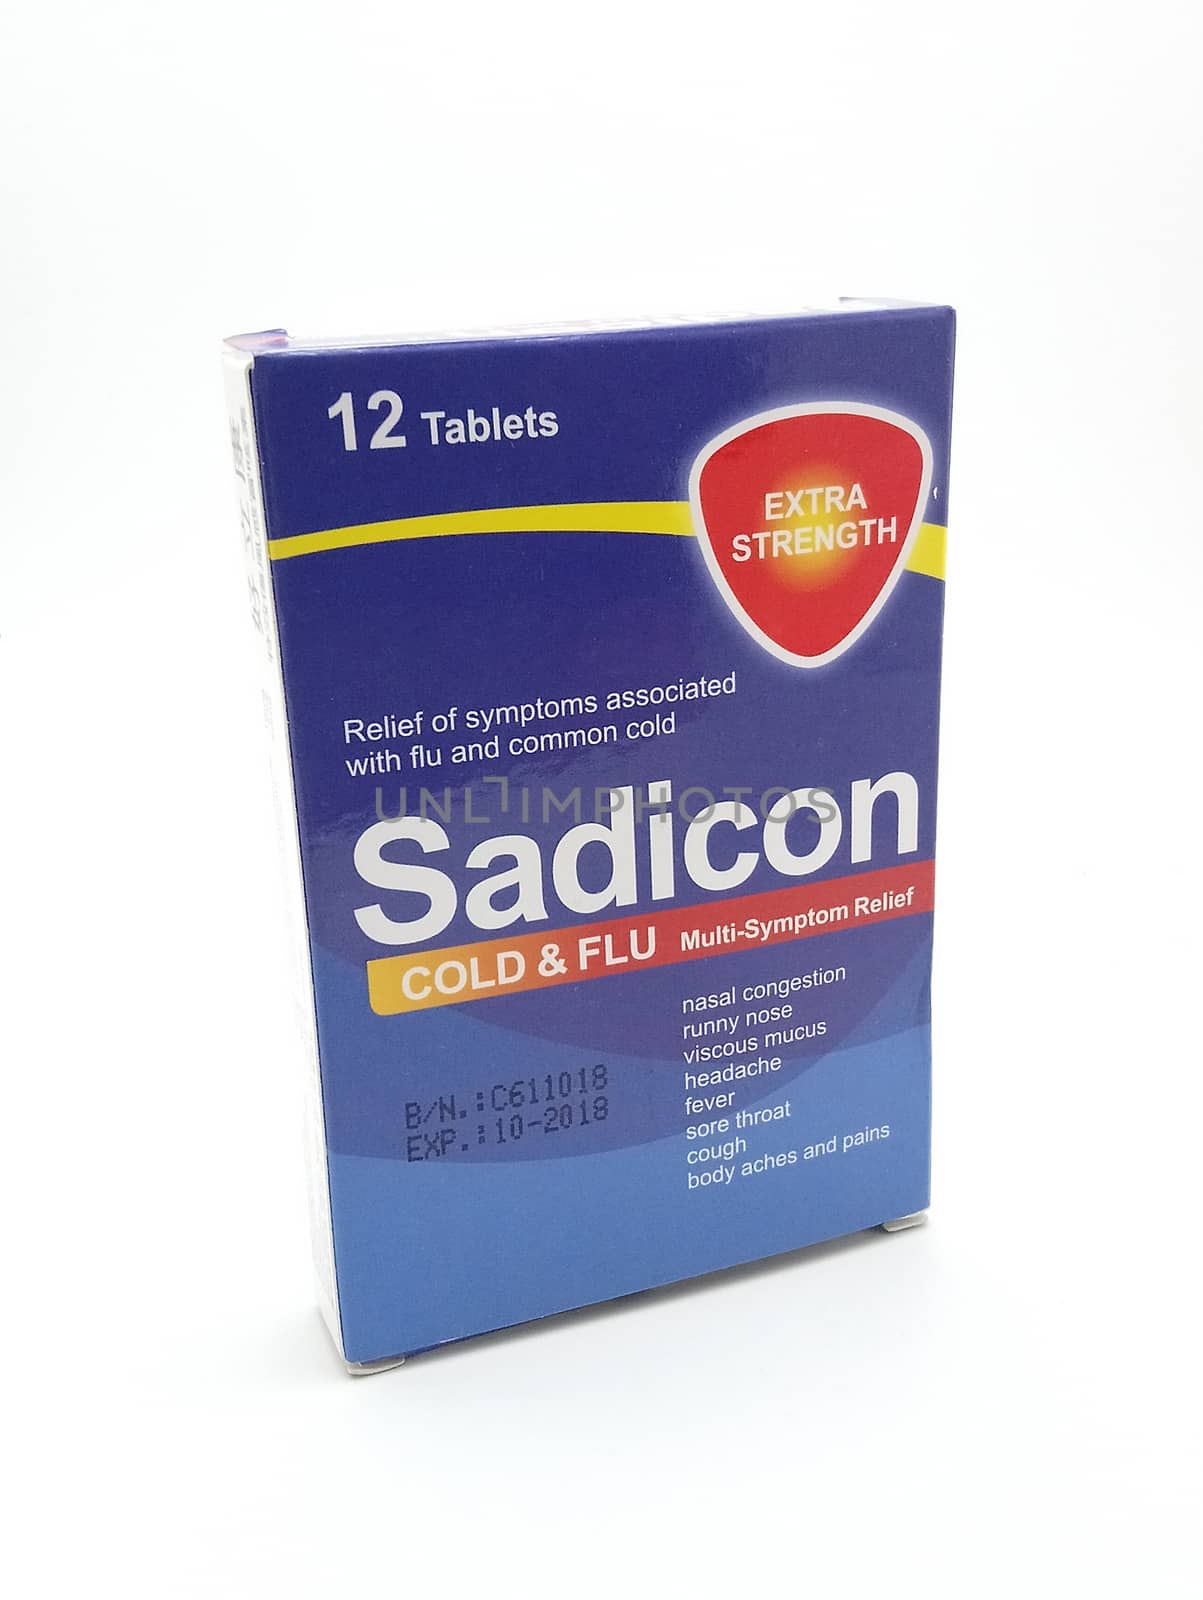 MANILA, PH - SEPT 25 - Sadicon cold and flu tablets box on September 25, 2020 in Manila, Philippines.